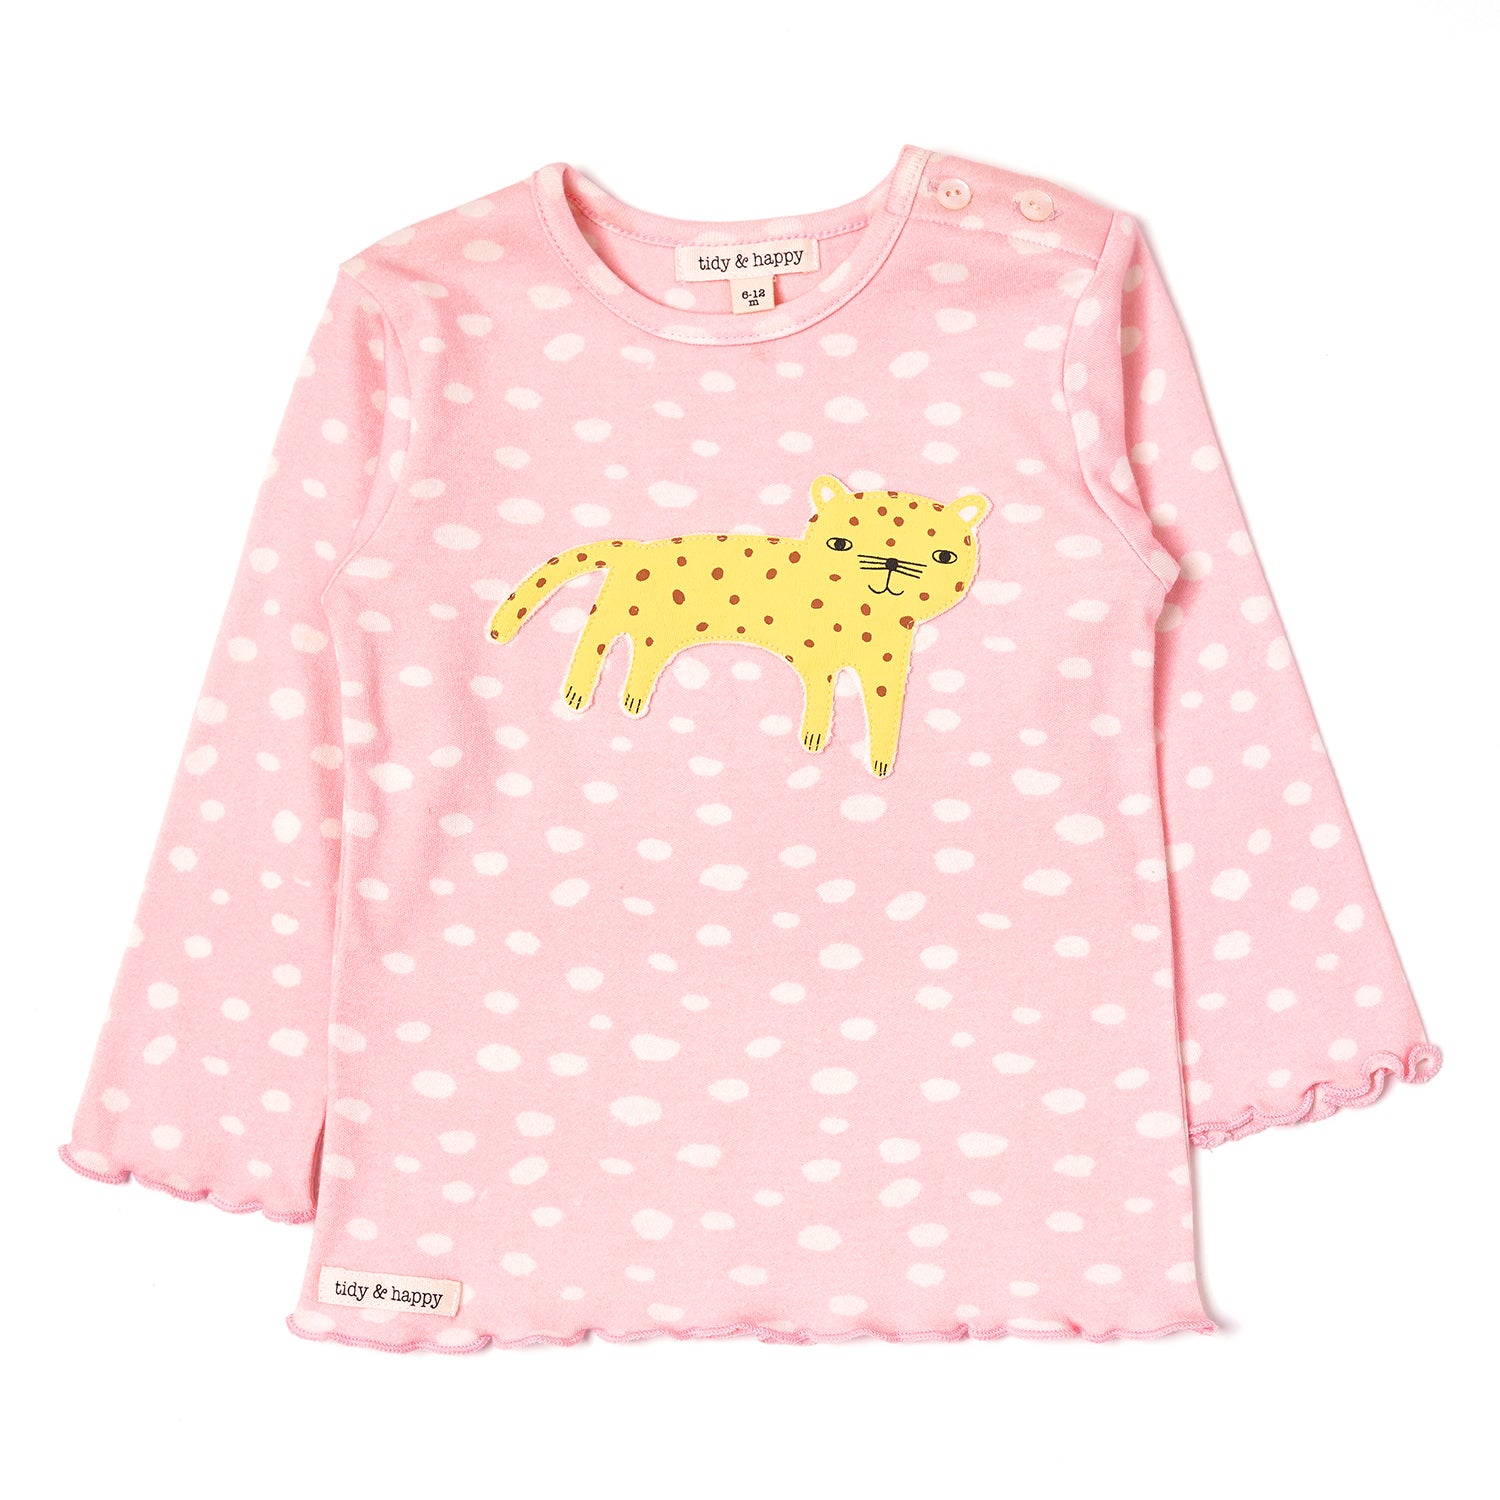 Stylish Comfy Pink Polka (Leopard Print) Top for baby Girls